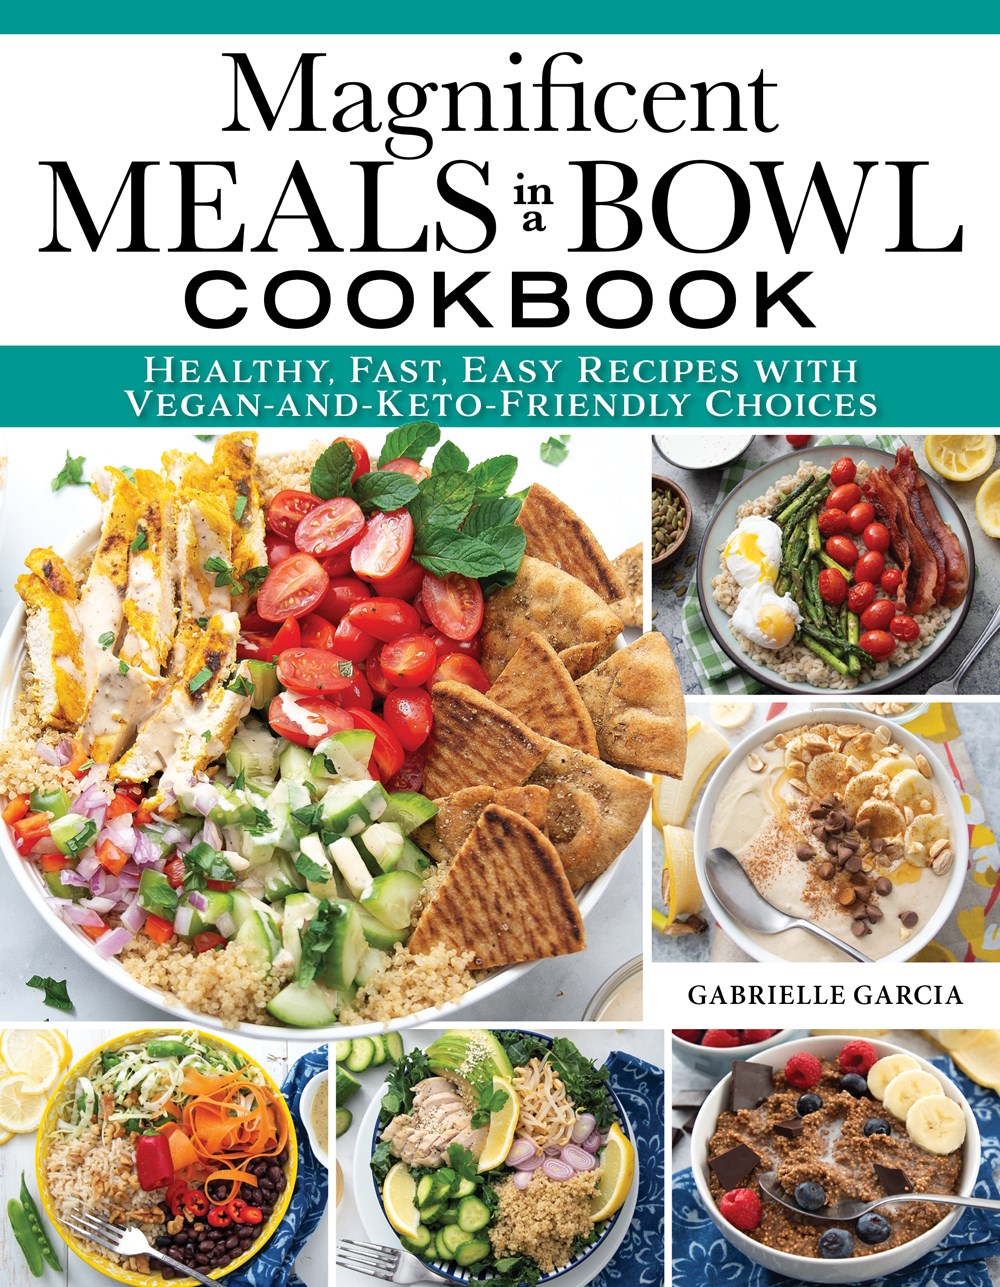 Magnificent Meals in a Bowl Cookbook: Healthy, Fast, Easy Recipes with Vegan- and Keto-Friendly Choices